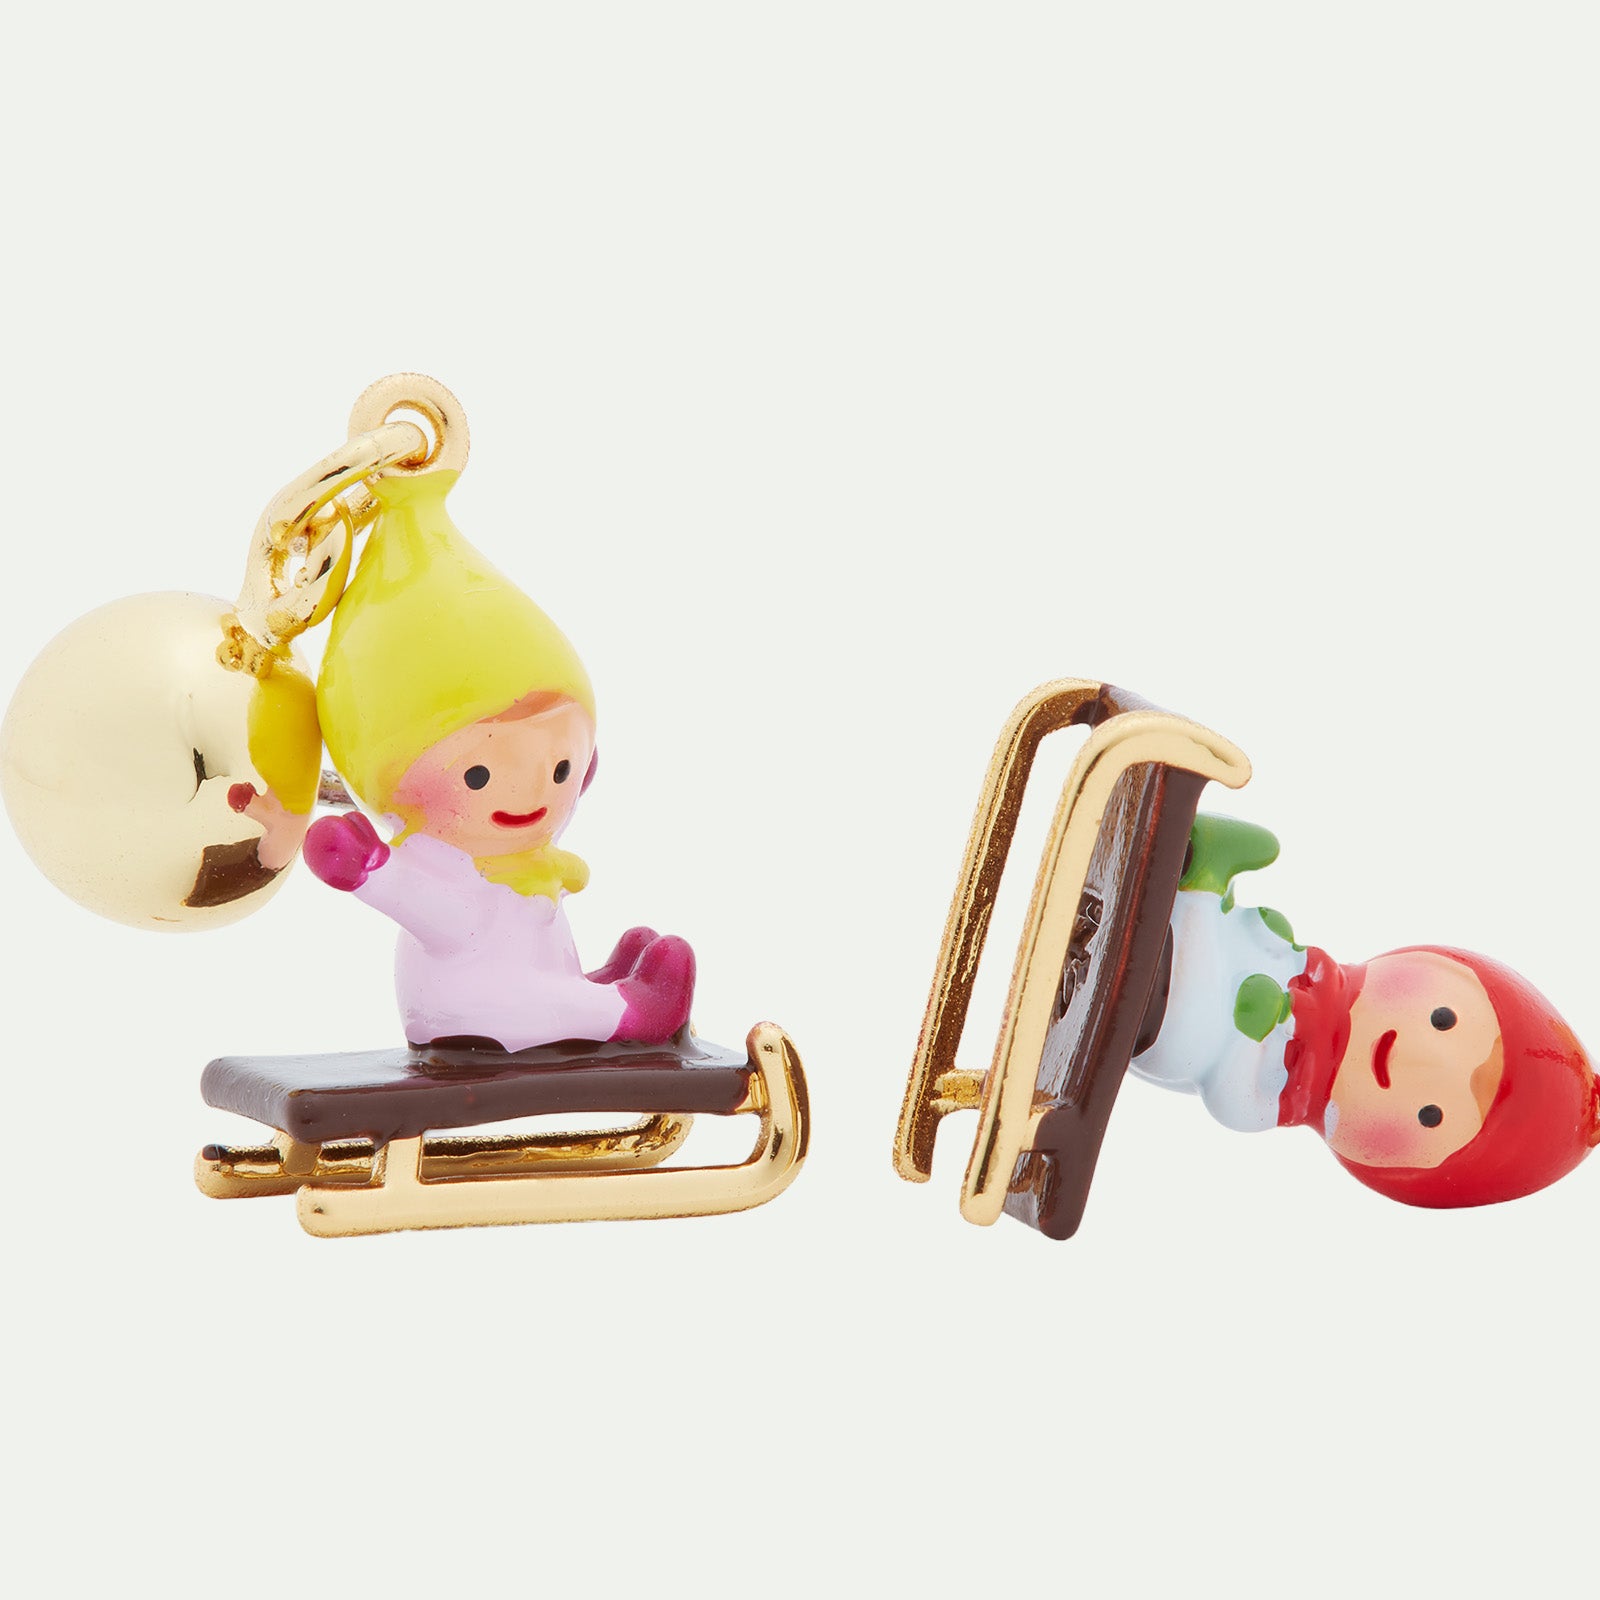 Sledging young garden gnome clip-on earrings